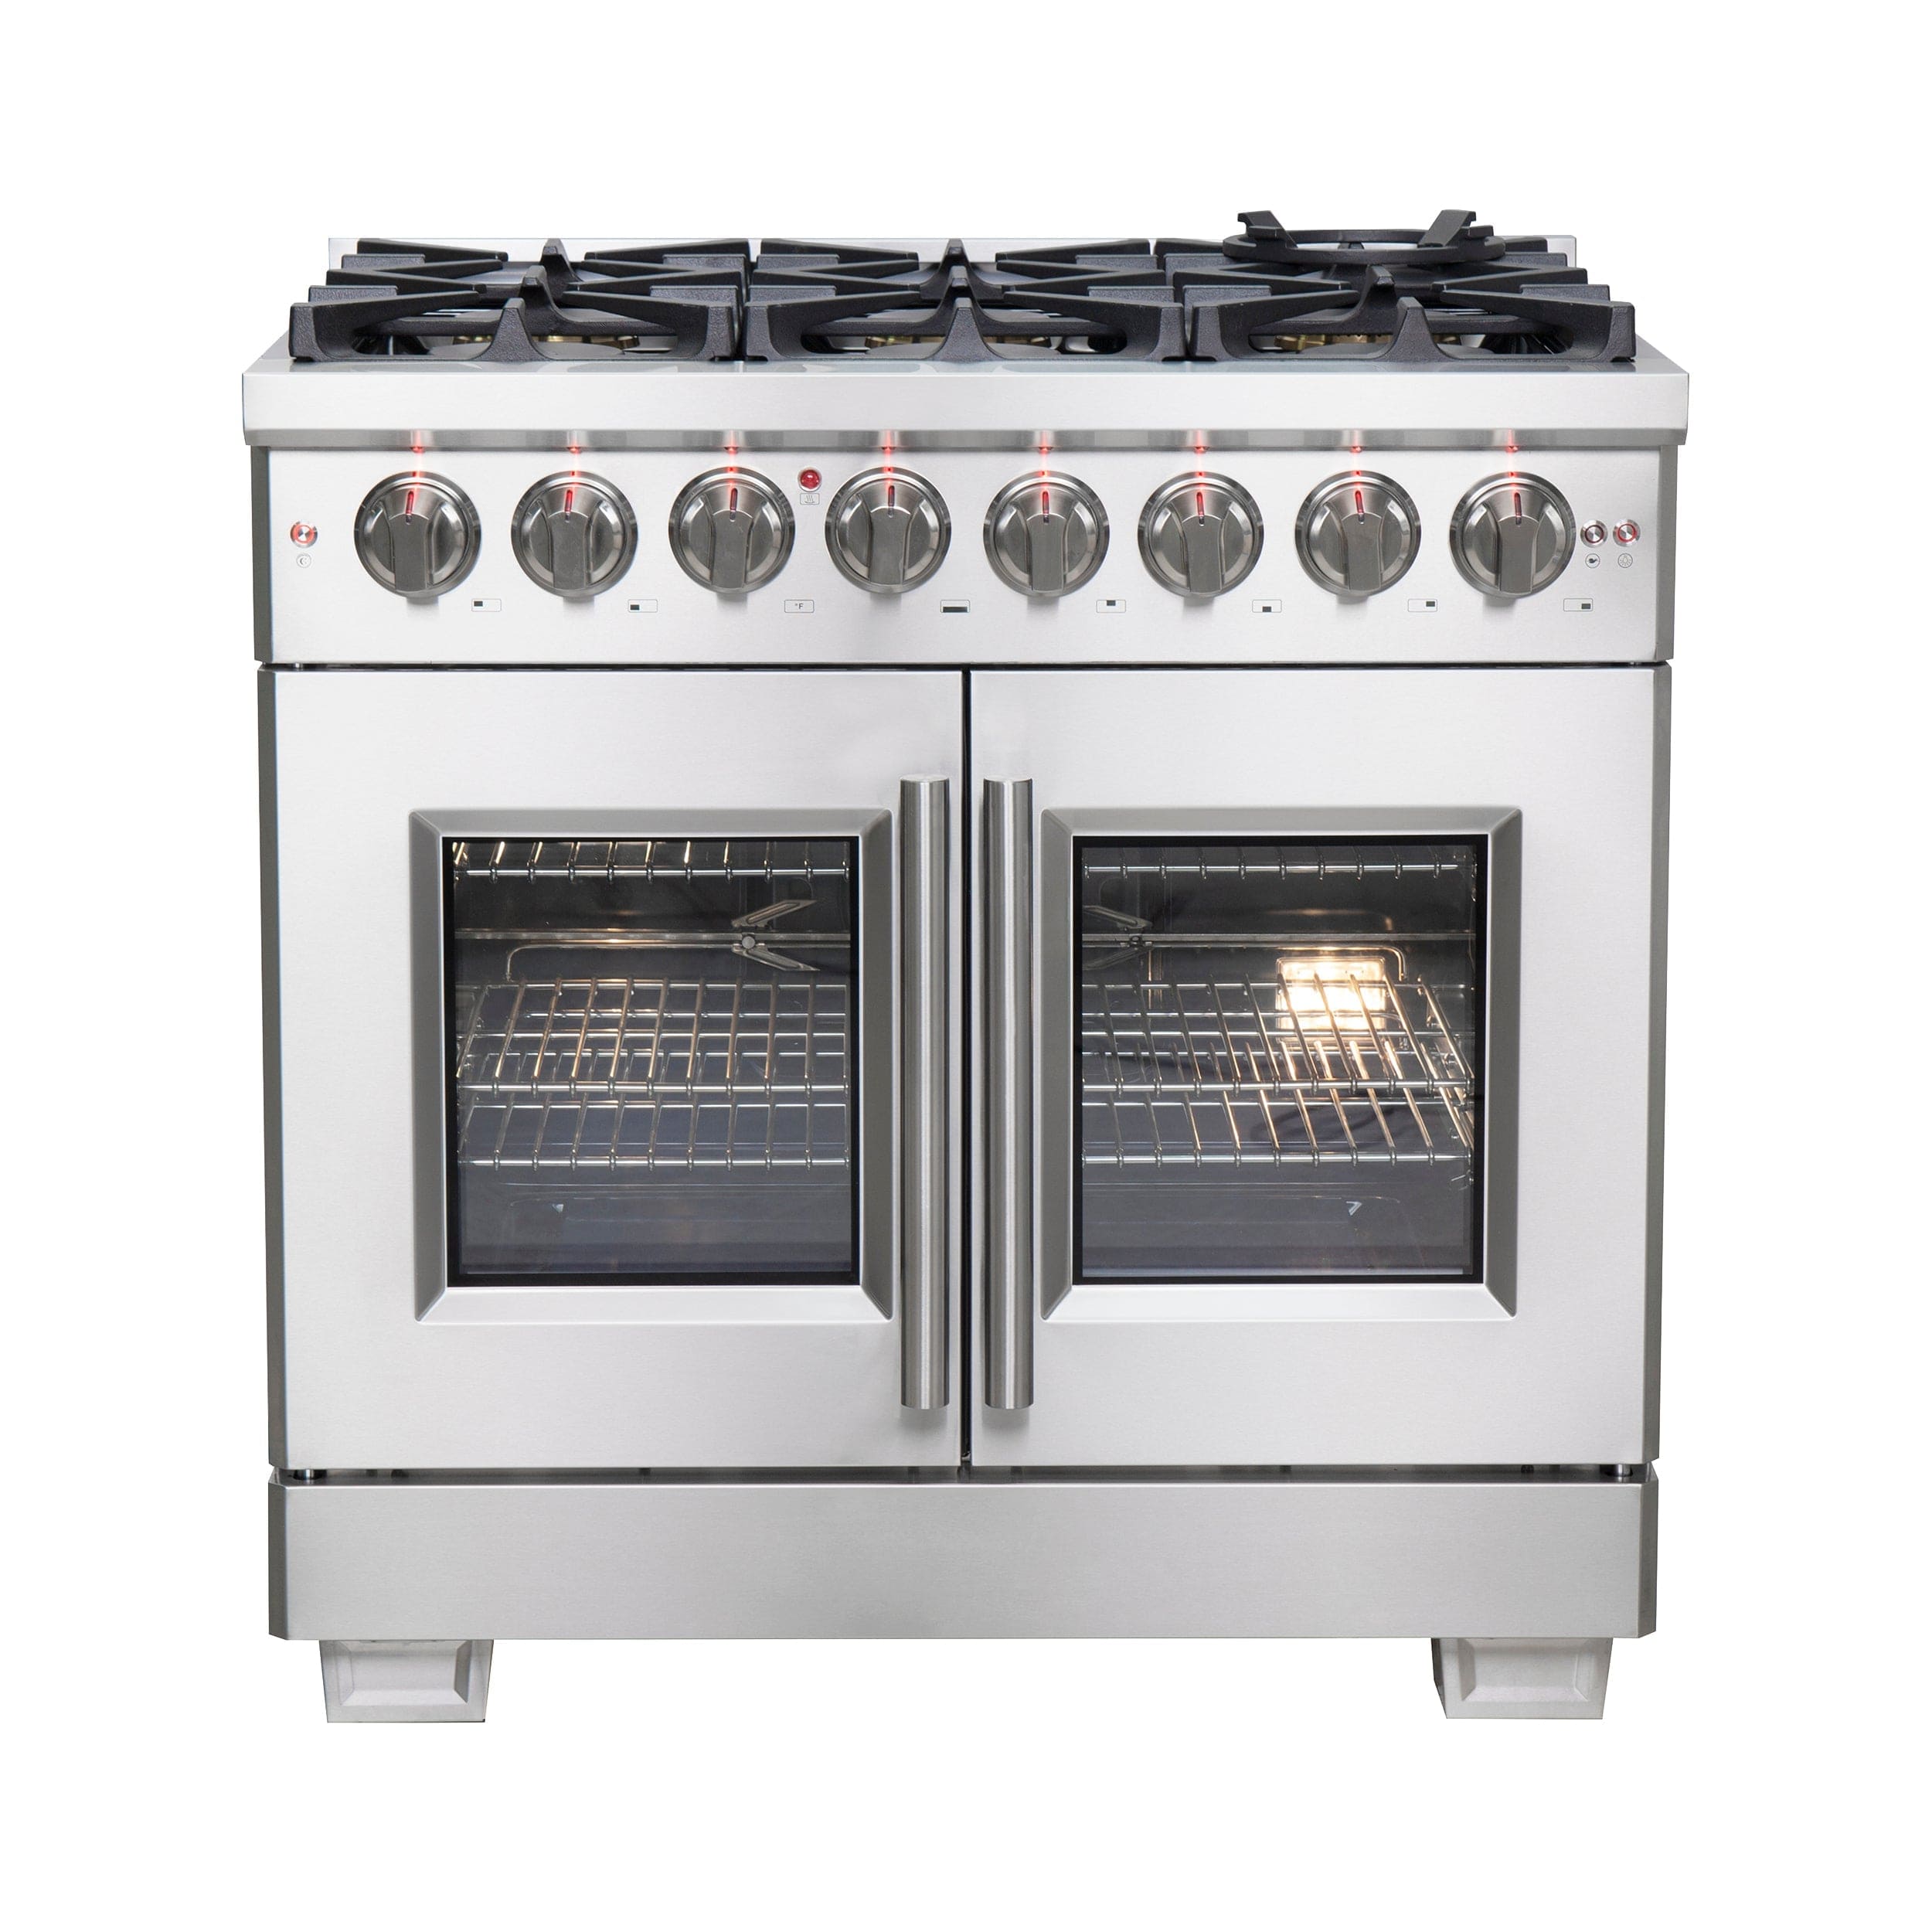 Forno 36" Professional Gas Burner, Electric Oven Range With French Door And 6 Sealed Burners, FFSGS6387-36 Range FFSGS6387-36 Luxury Appliances Direct